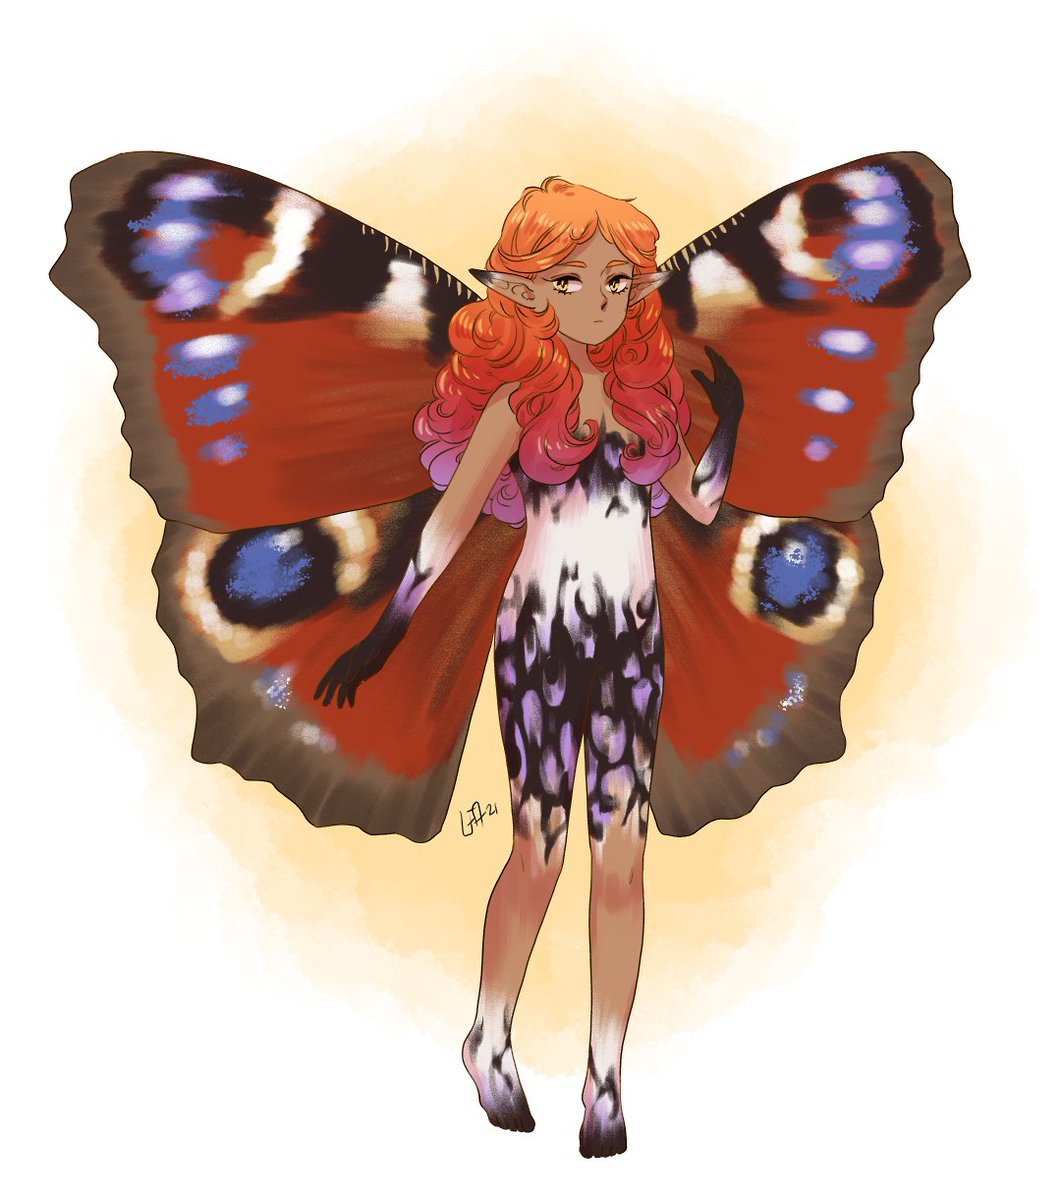 RT @ladugarden: i got a bit lazy with it, but i suddenly wanted to draw a peacock butterfly faerie https://t.co/izRKG1YRTs